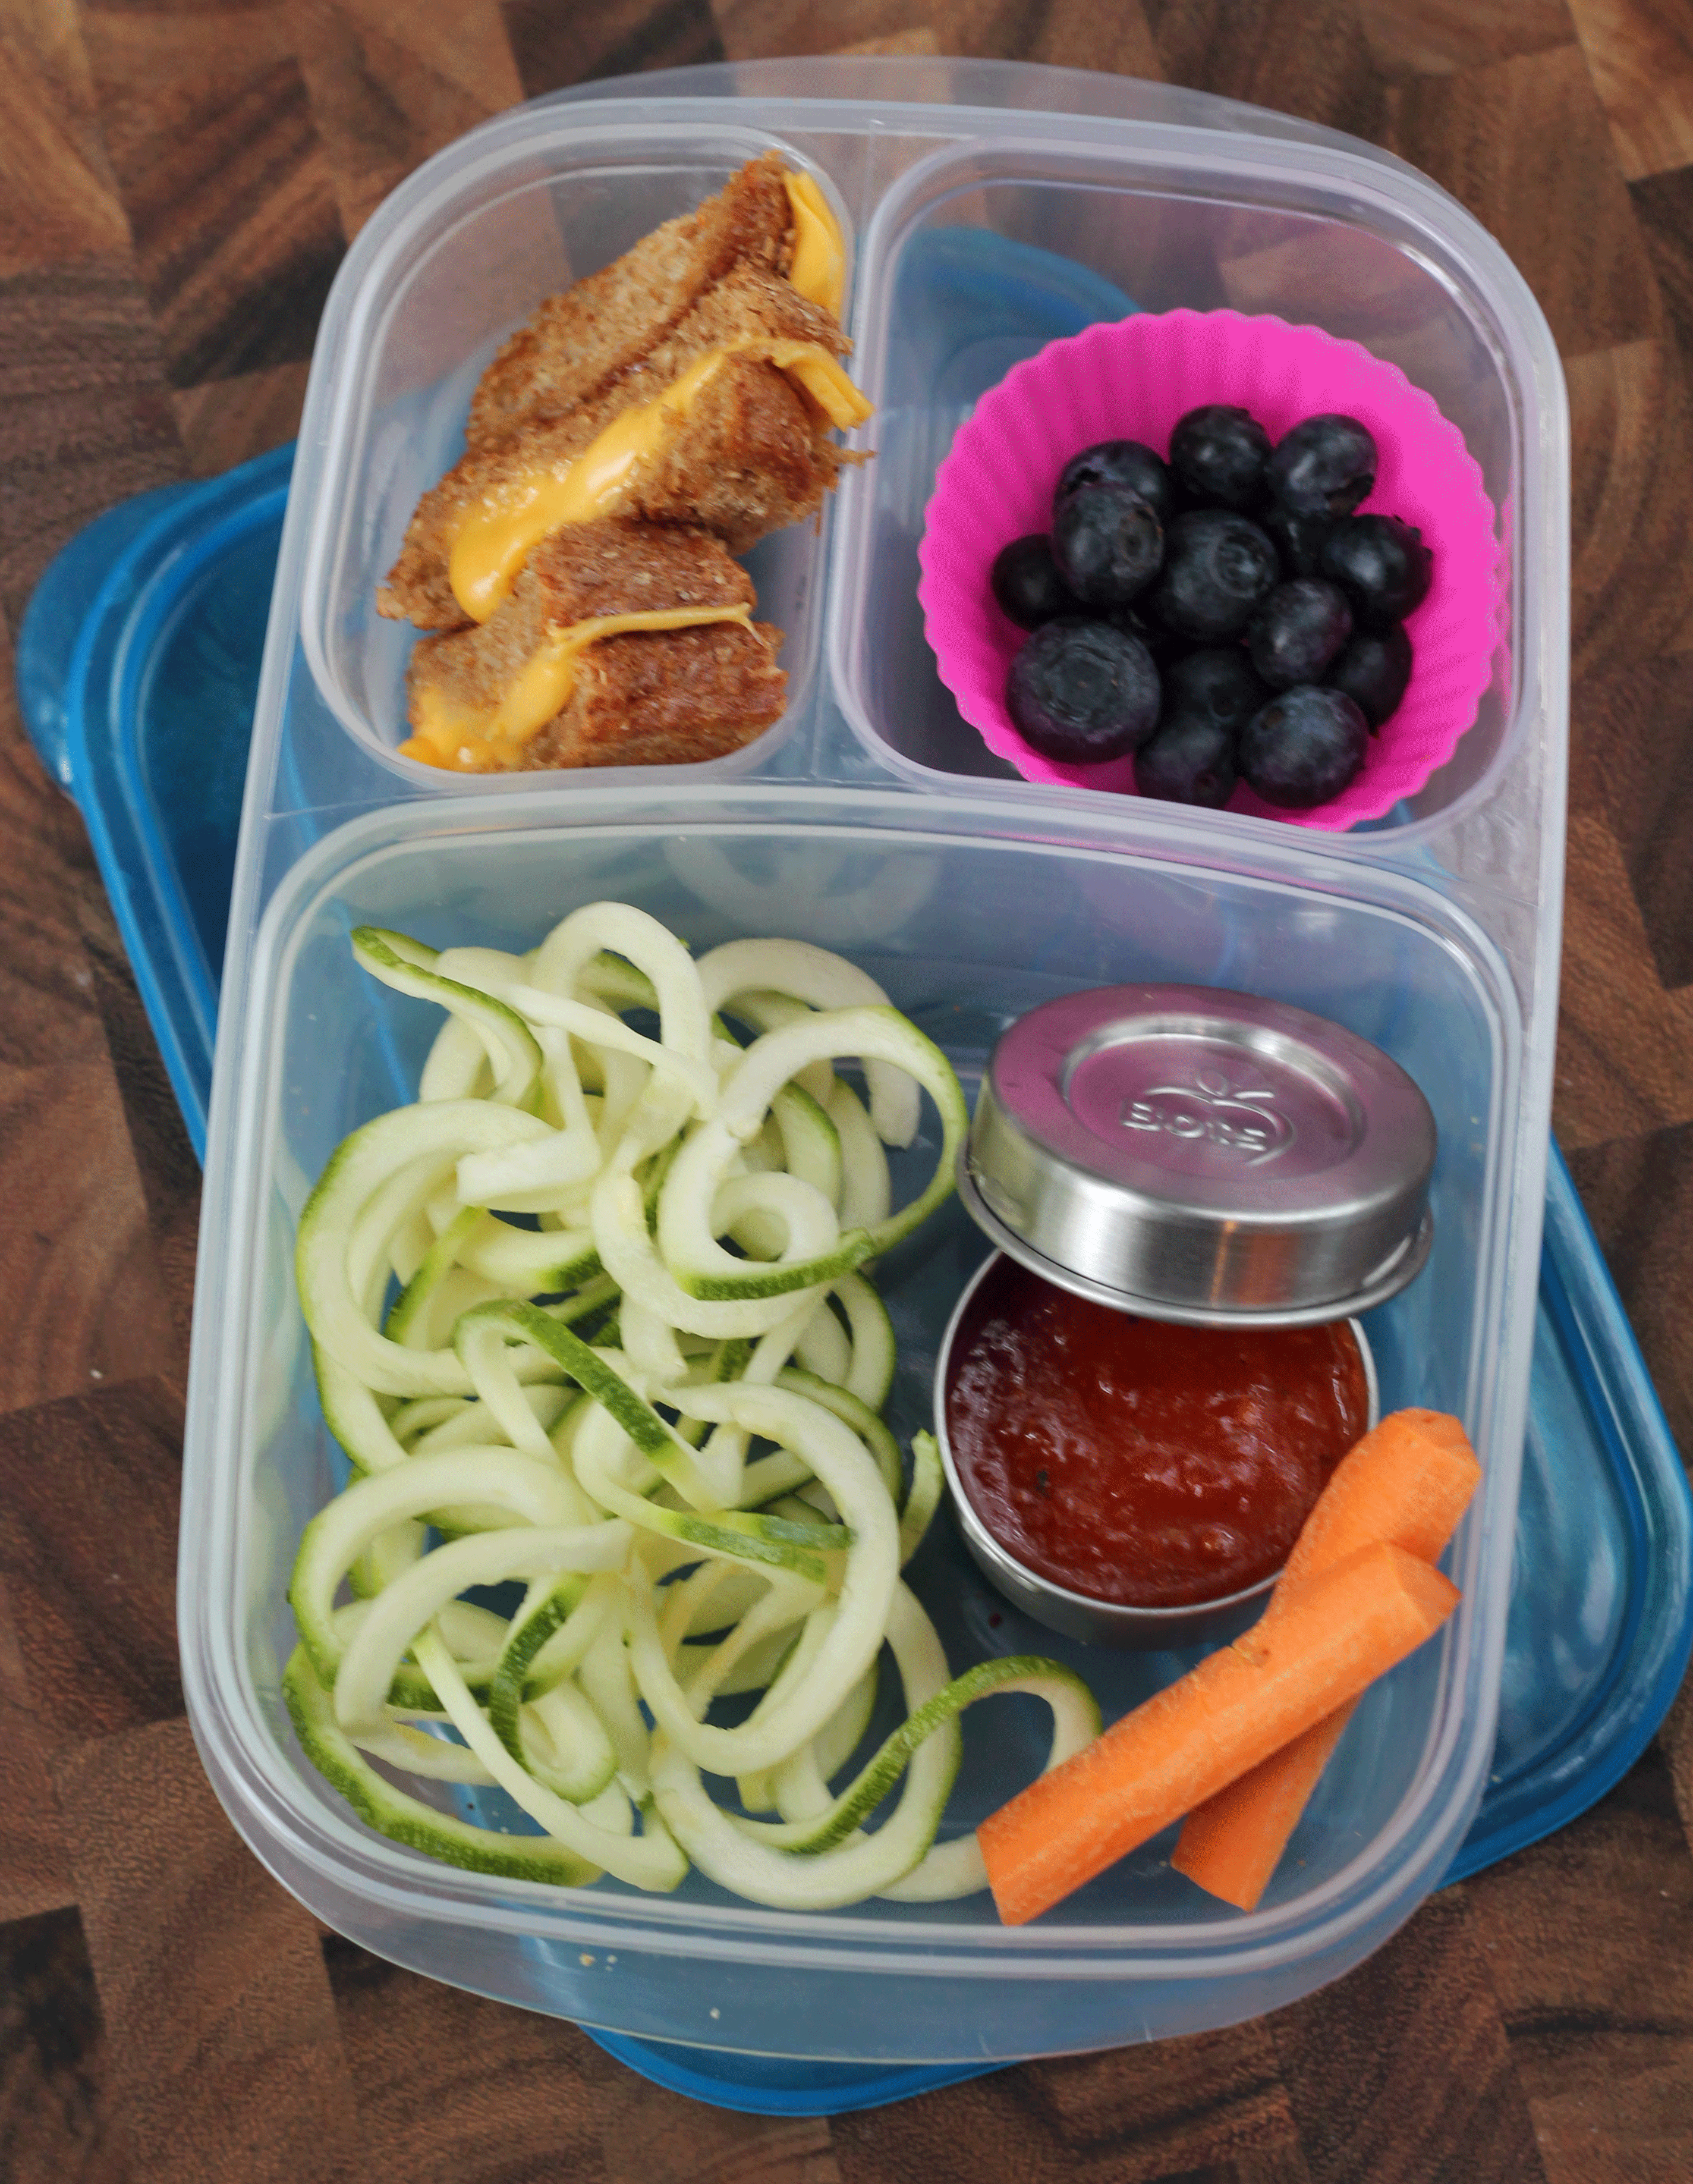 Back to School Lunch Ideas- Zucchini Noodles and Grilled Cheese. I've been obsessed with my spiralizer lately and this is such a fun lunch idea! A great alternative to regular pasta.